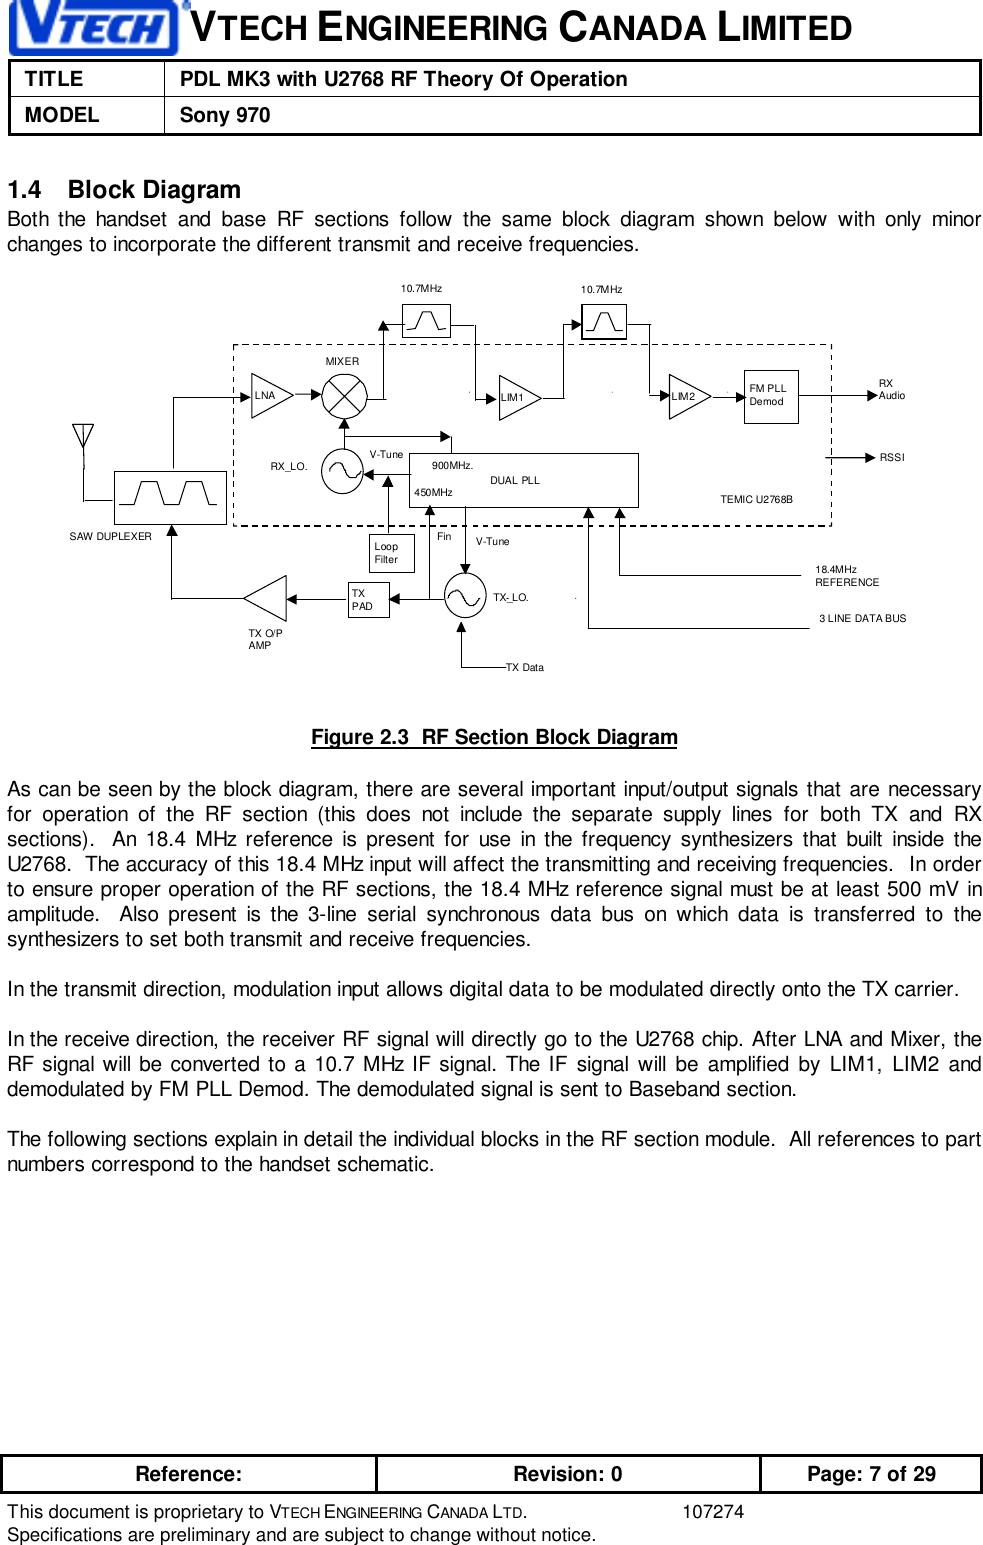 VTECH ENGINEERING CANADA LIMITEDTITLE PDL MK3 with U2768 RF Theory Of OperationMODEL Sony 970Reference: Revision: 0 Page: 7 of 29This document is proprietary to VTECH ENGINEERING CANADA LTD. 107274Specifications are preliminary and are subject to change without notice.1.4 Block DiagramBoth the handset and base RF sections follow the same block diagram shown below with only minorchanges to incorporate the different transmit and receive frequencies.18.4MHzREFERENCE3 LINE DATA BUSRX_LO.FinV-TuneTX O/PAMPTEMIC U2768BTX DataSAW DUPLEXERRXAudioRSSIDUAL PLLLNAMIXERV-TuneFM PLLDemodLIM2LIM110.7MHz10.7MHzLoopFilterTX_LO.450MHz900MHz.TXPADFigure 2.3  RF Section Block DiagramAs can be seen by the block diagram, there are several important input/output signals that are necessaryfor operation of the RF section (this does not include the separate supply lines for both TX and RXsections).  An 18.4 MHz reference is present for use in the frequency synthesizers that built inside theU2768.  The accuracy of this 18.4 MHz input will affect the transmitting and receiving frequencies.  In orderto ensure proper operation of the RF sections, the 18.4 MHz reference signal must be at least 500 mV inamplitude.  Also present is the 3-line serial synchronous data bus on which data is transferred to thesynthesizers to set both transmit and receive frequencies.In the transmit direction, modulation input allows digital data to be modulated directly onto the TX carrier.In the receive direction, the receiver RF signal will directly go to the U2768 chip. After LNA and Mixer, theRF signal will be converted to a 10.7 MHz IF signal. The IF signal will be amplified by LIM1, LIM2 anddemodulated by FM PLL Demod. The demodulated signal is sent to Baseband section.The following sections explain in detail the individual blocks in the RF section module.  All references to partnumbers correspond to the handset schematic.